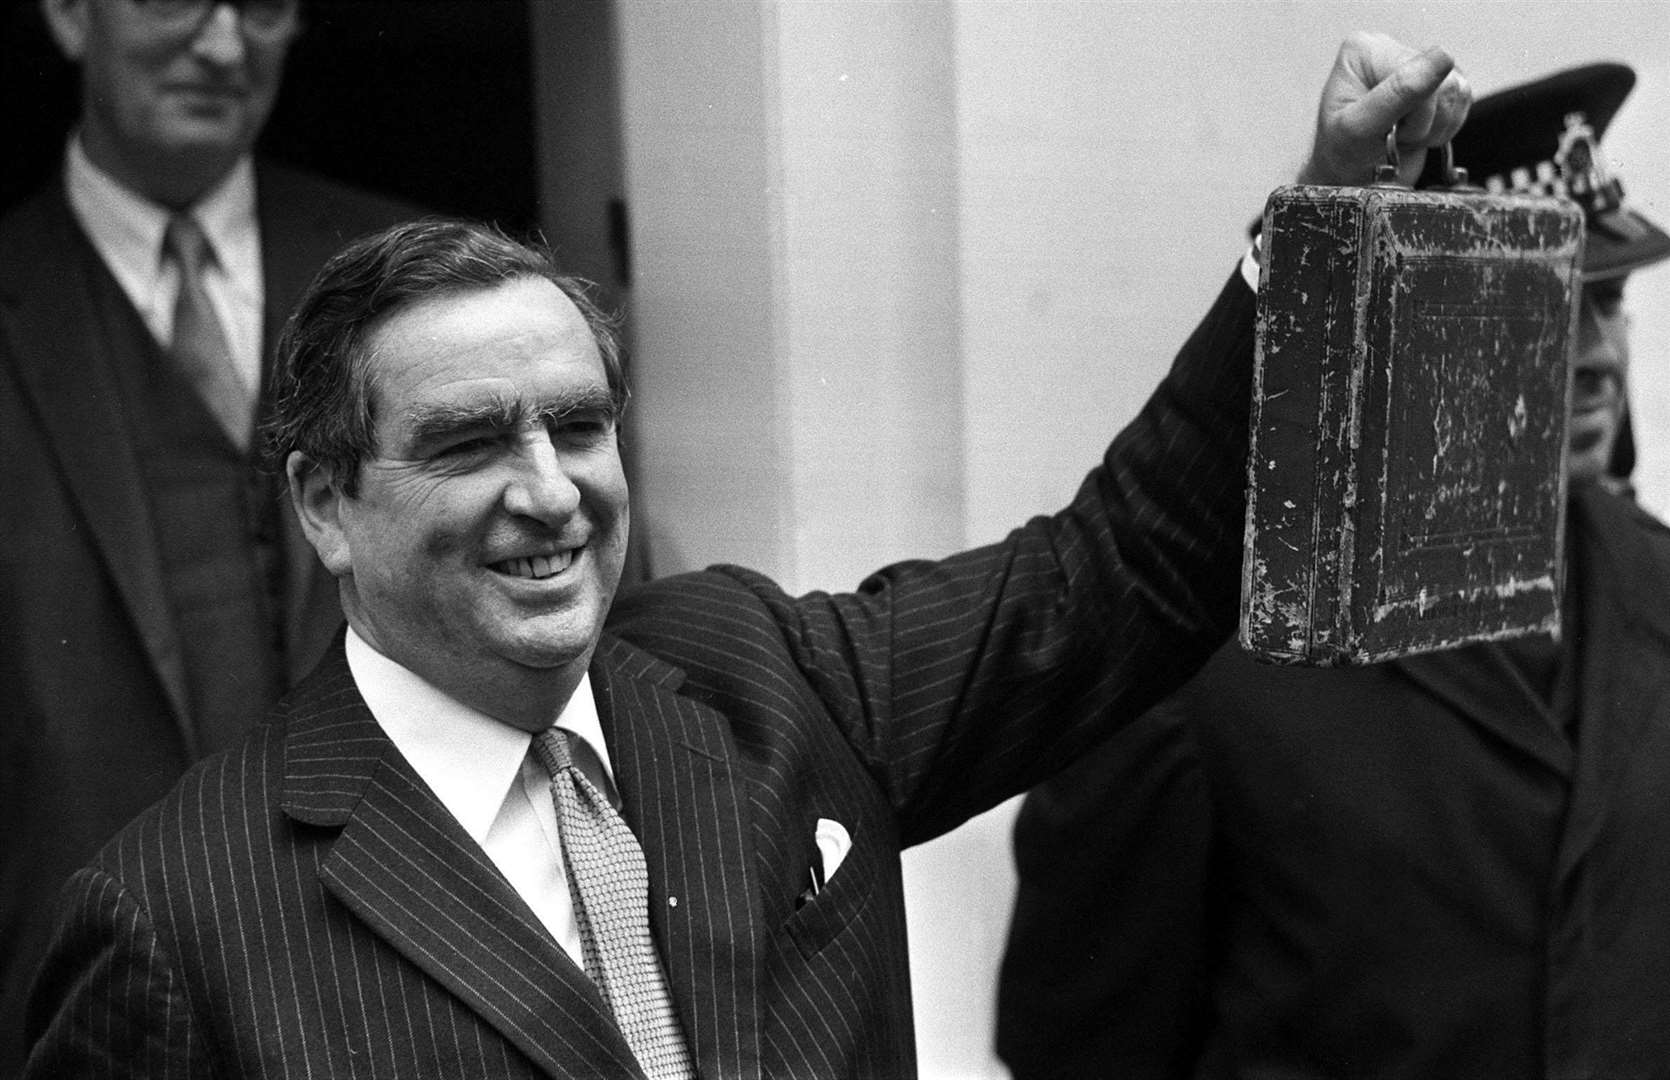 Chancellor of the exchequer Denis Healey leaves Downing Street to deliver his Budget speech in March 1974 (PA)